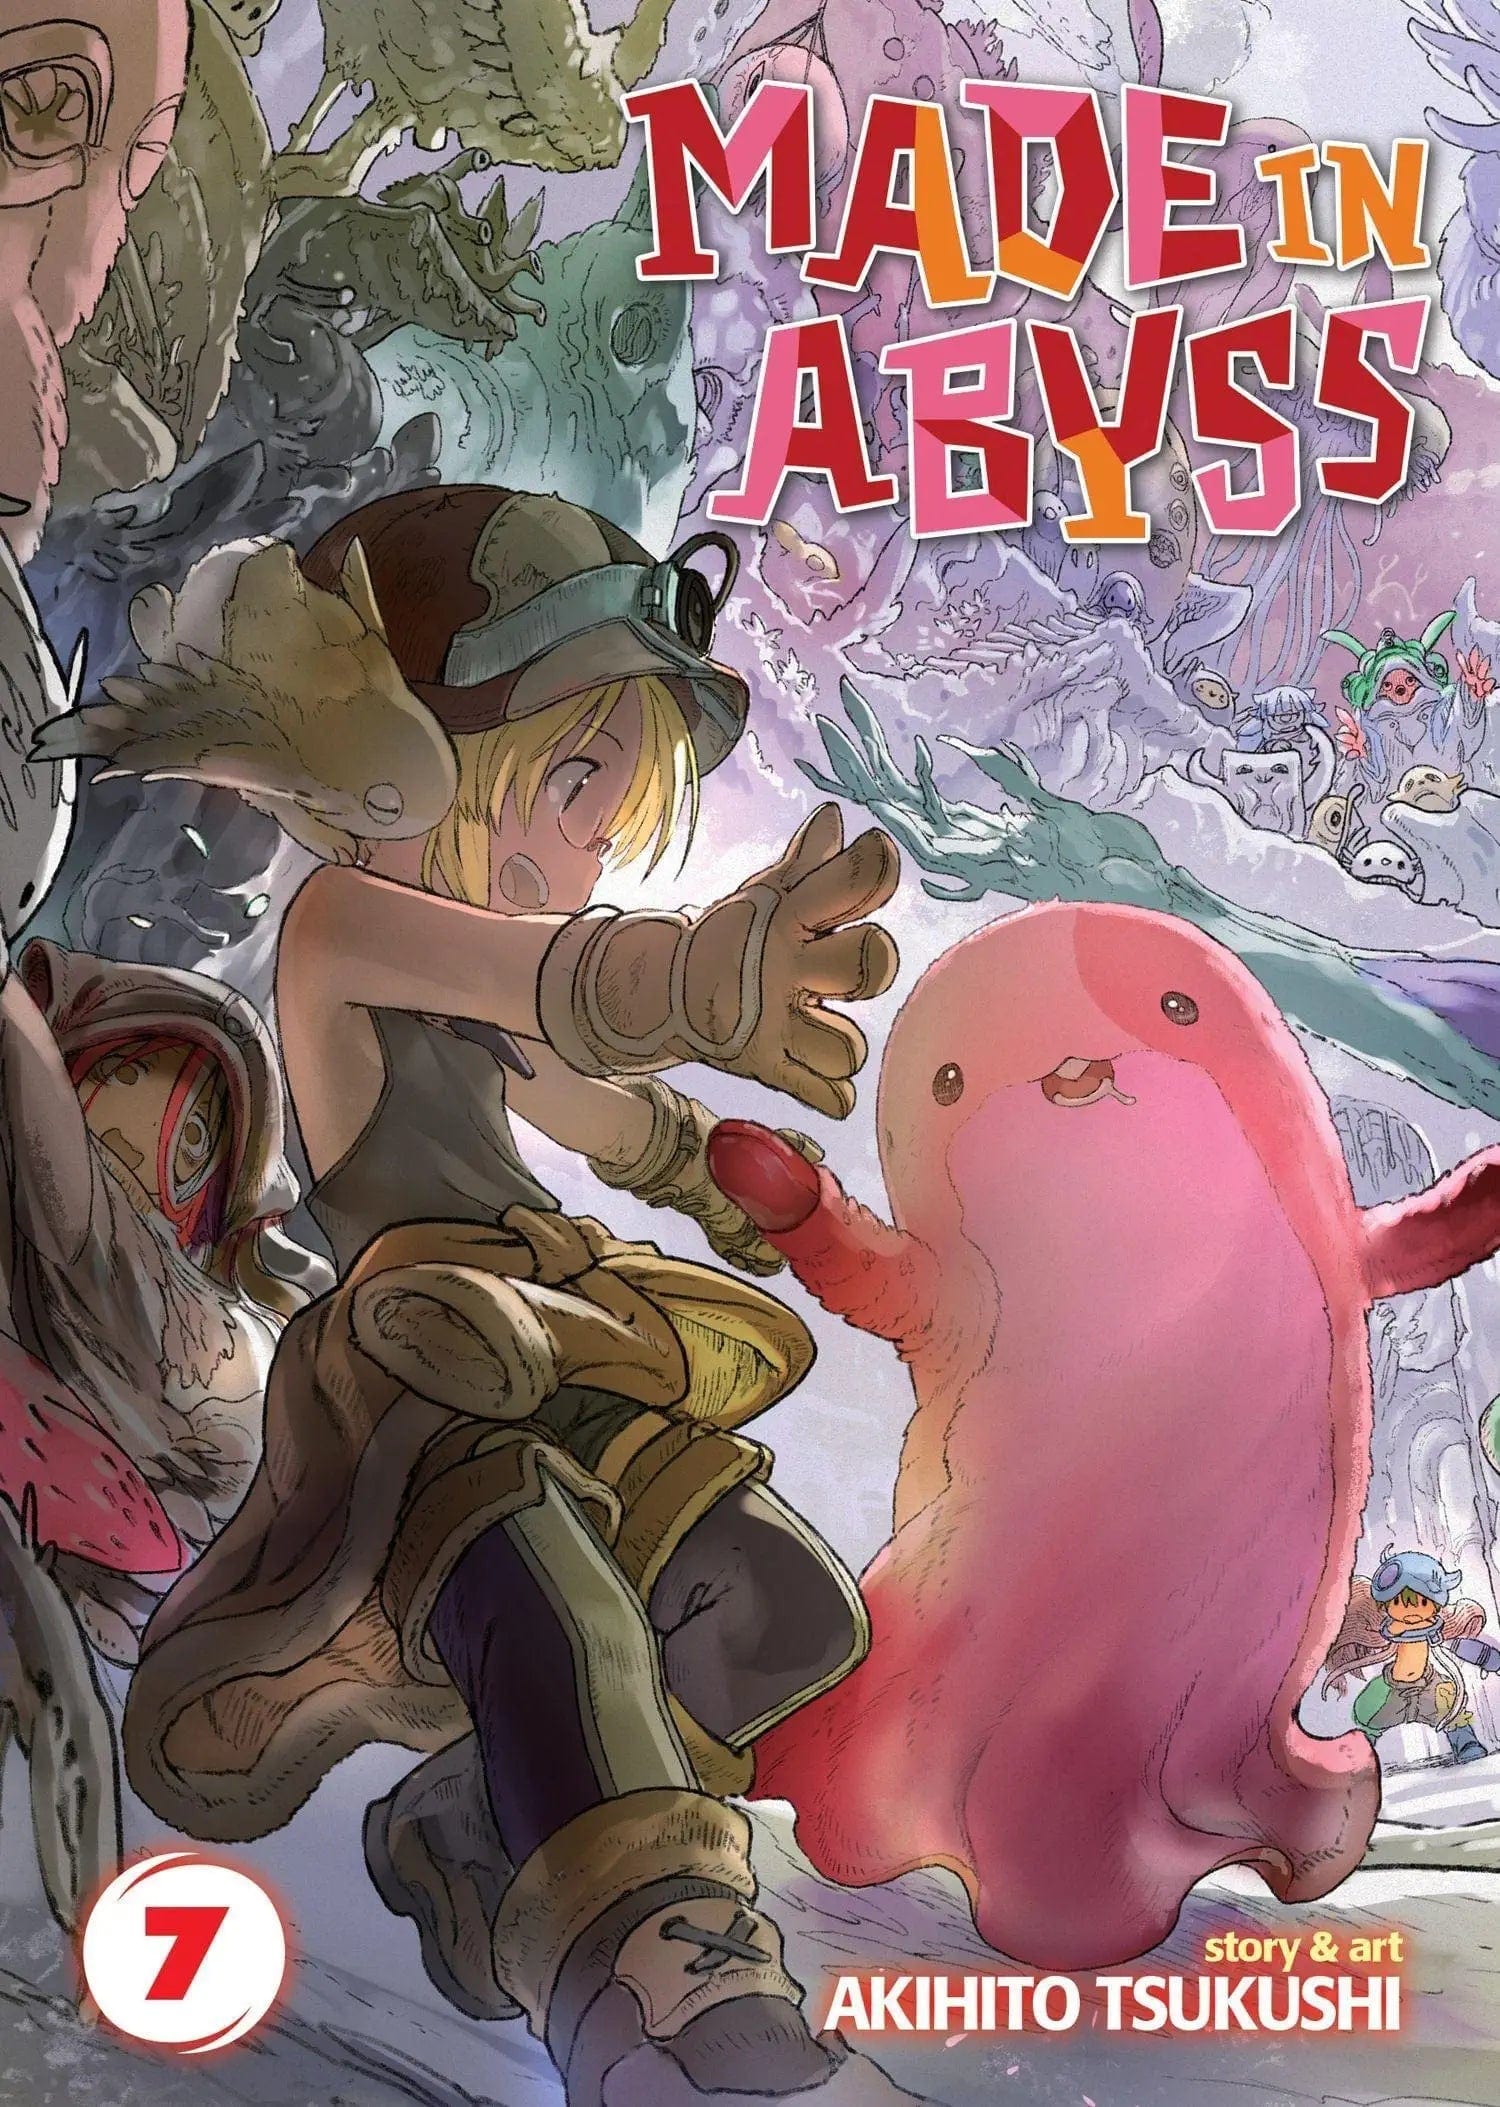 Made in Abyss Vol. 7 - Third Eye